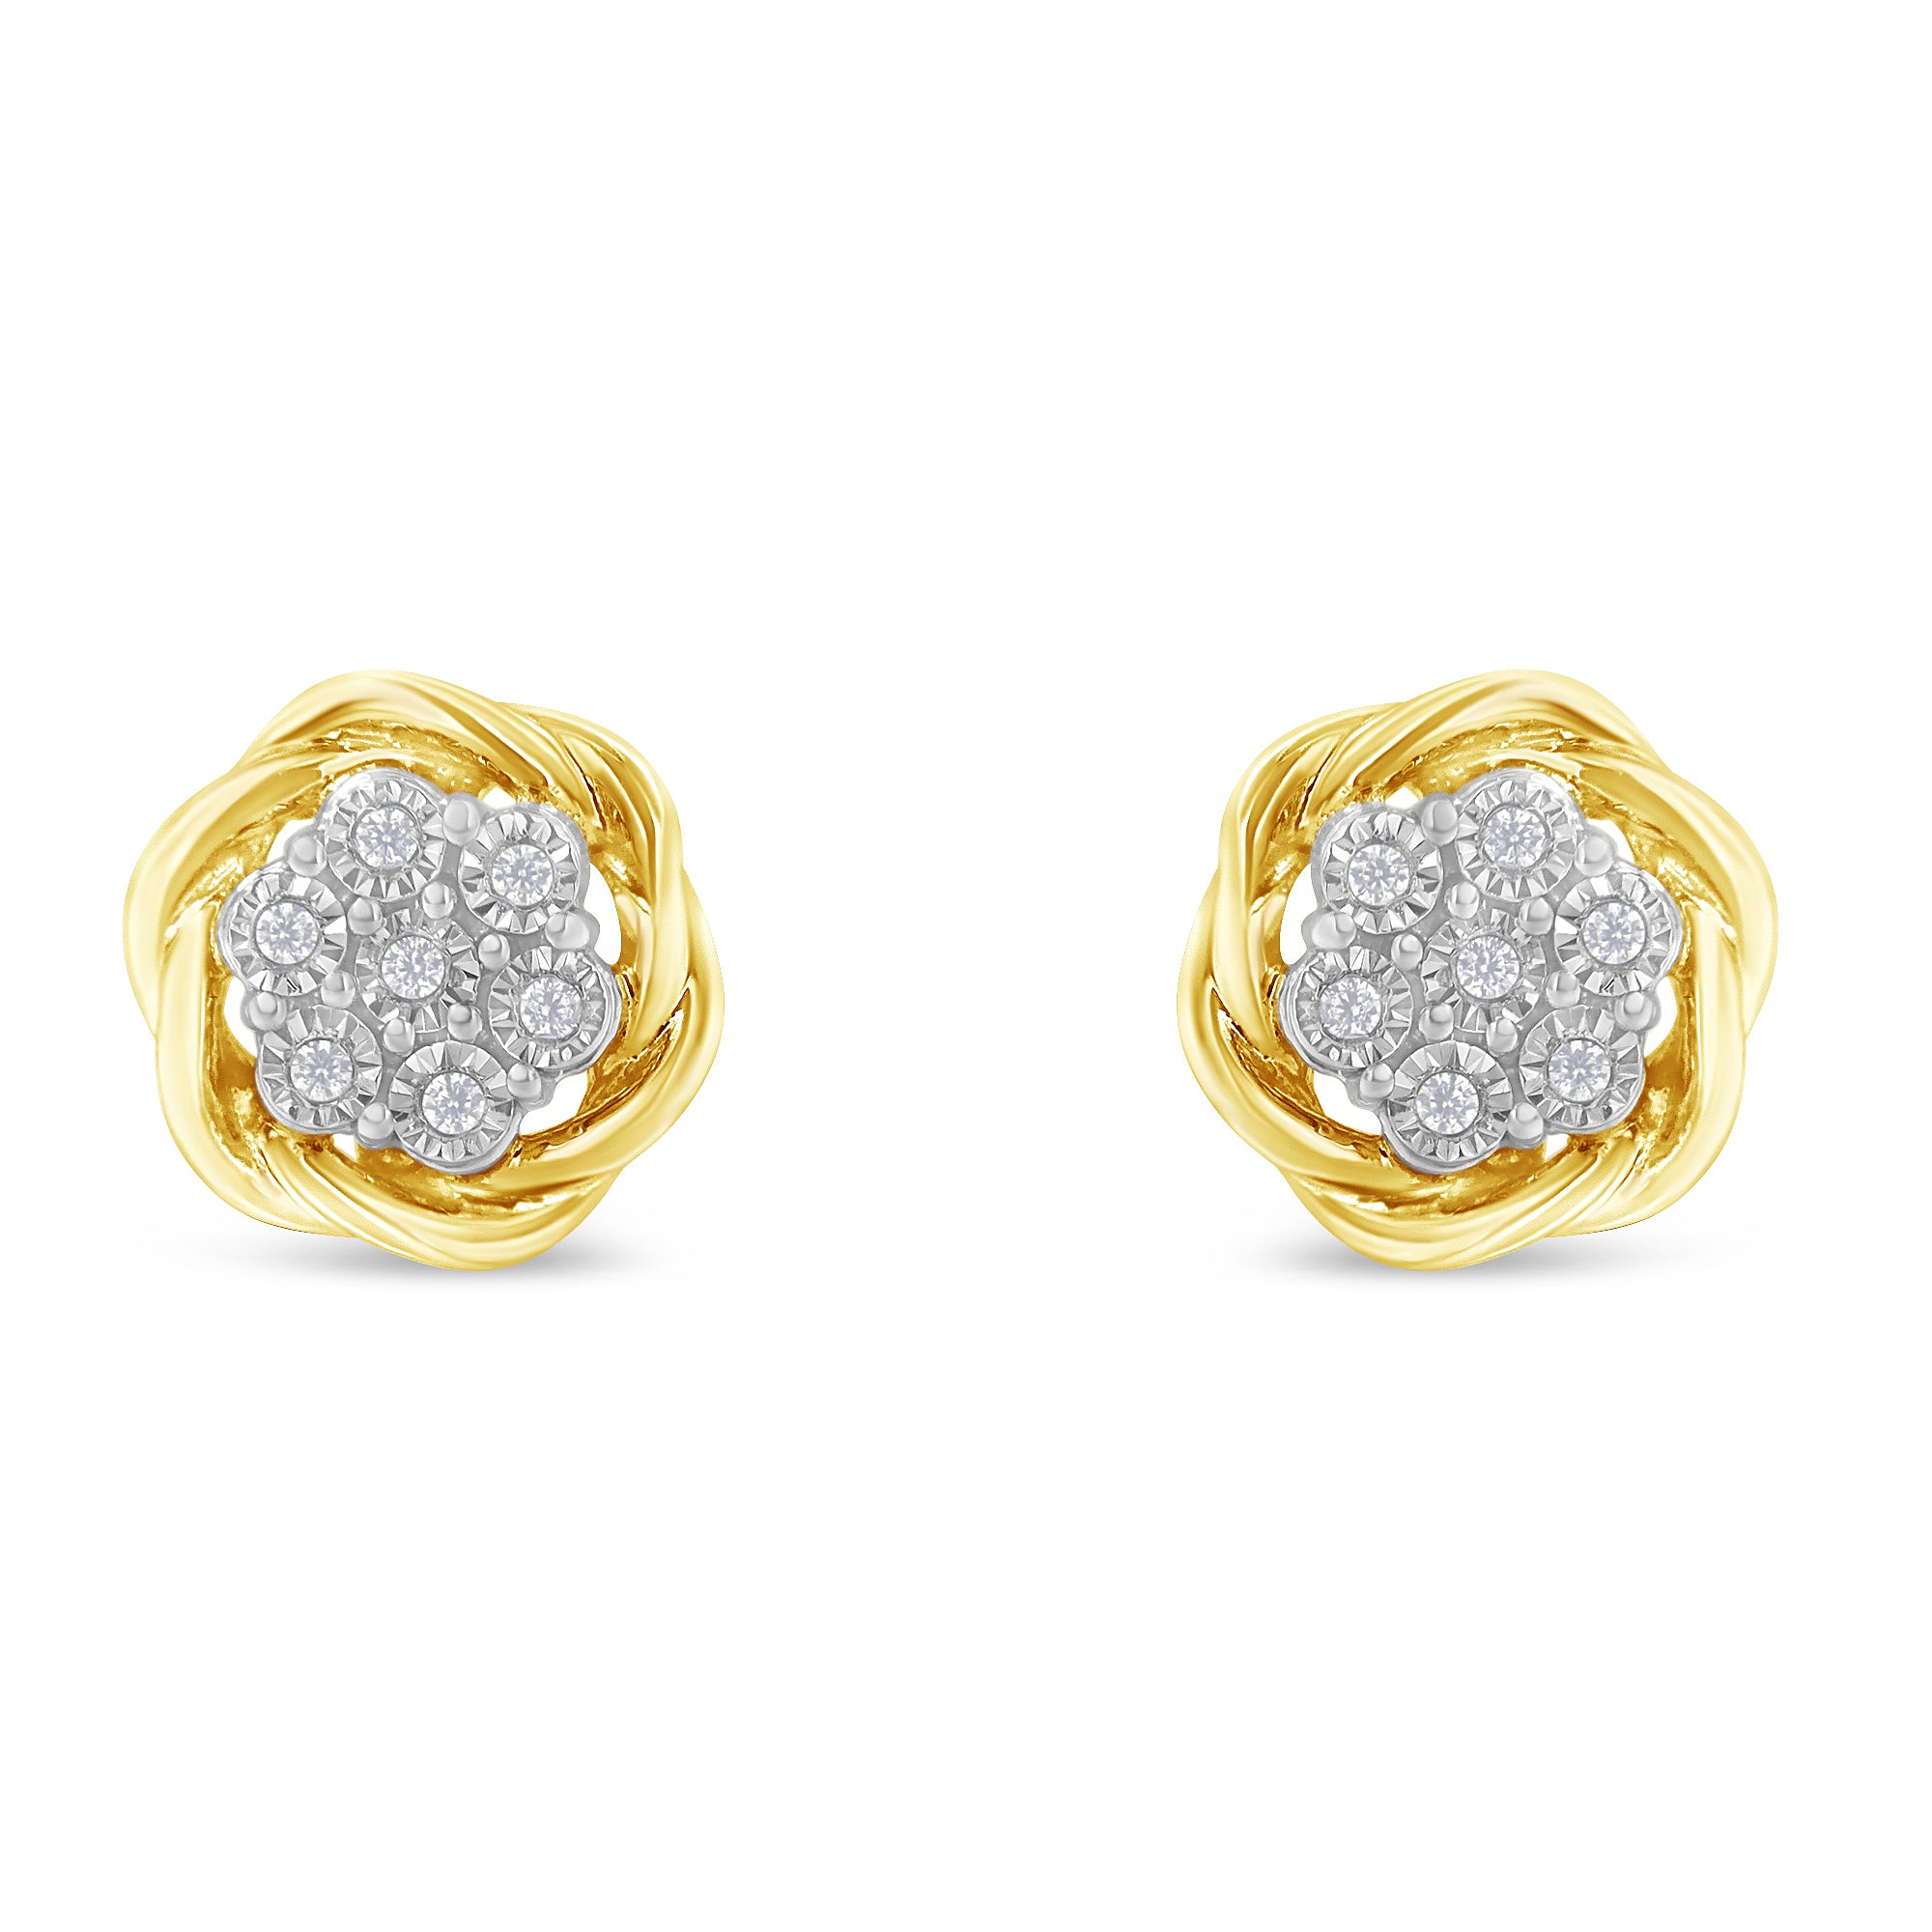 Yellow-Gold-Plated-Sterling-Silver-Diamond-Rose-Stud-Earrings-(0.15-Cttw,-I-J-Color,-I2-I3-Clarity)-Earrings